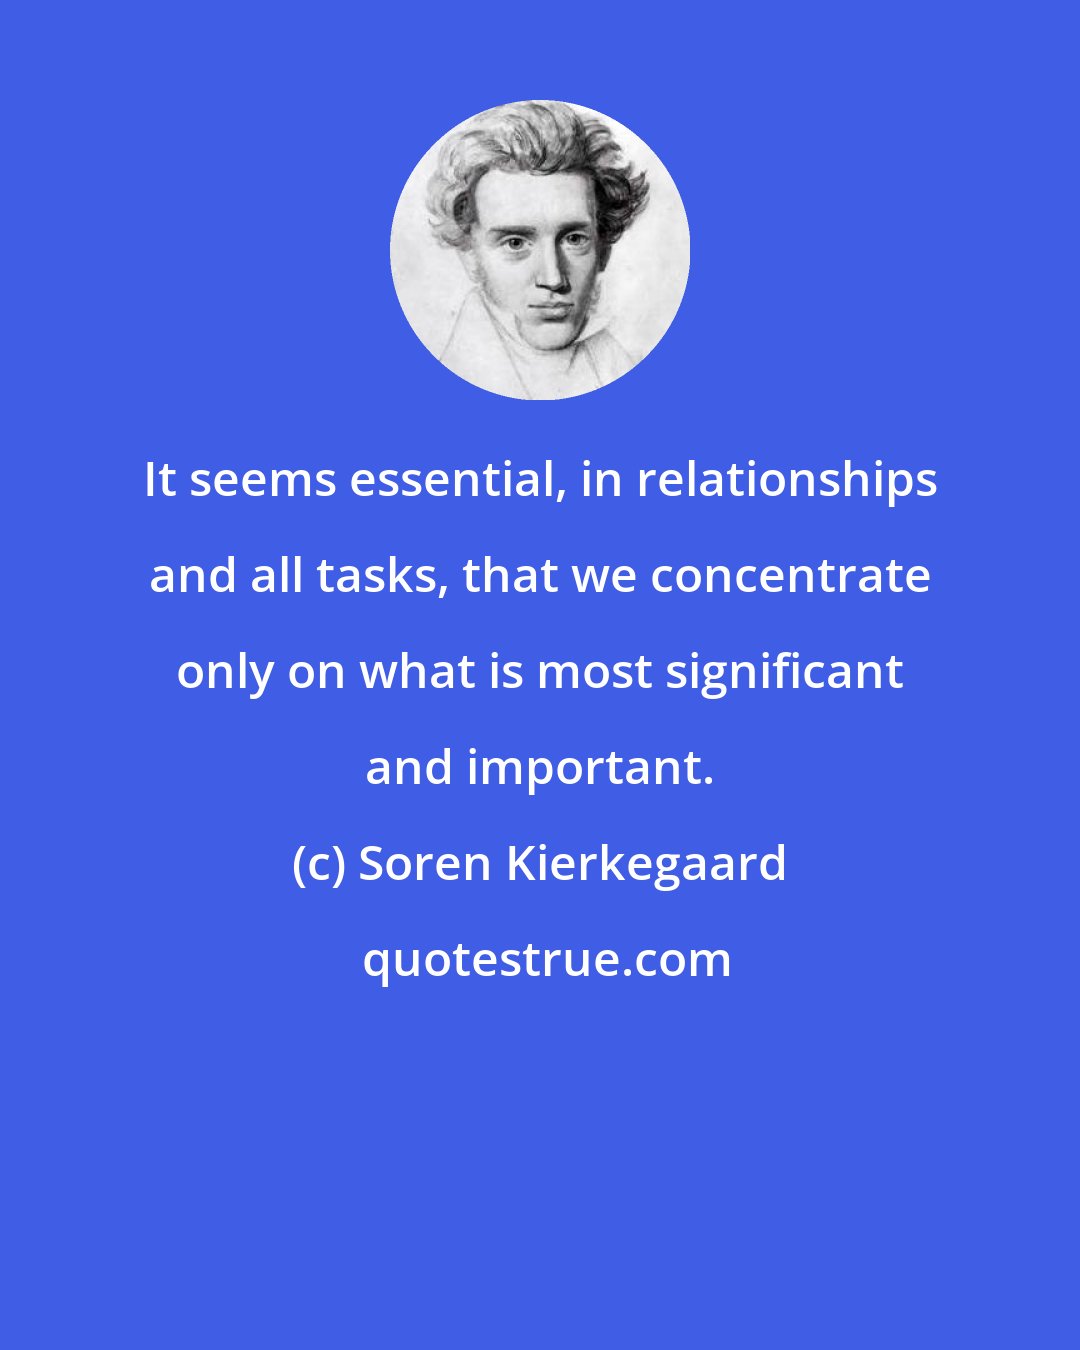 Soren Kierkegaard: It seems essential, in relationships and all tasks, that we concentrate only on what is most significant and important.